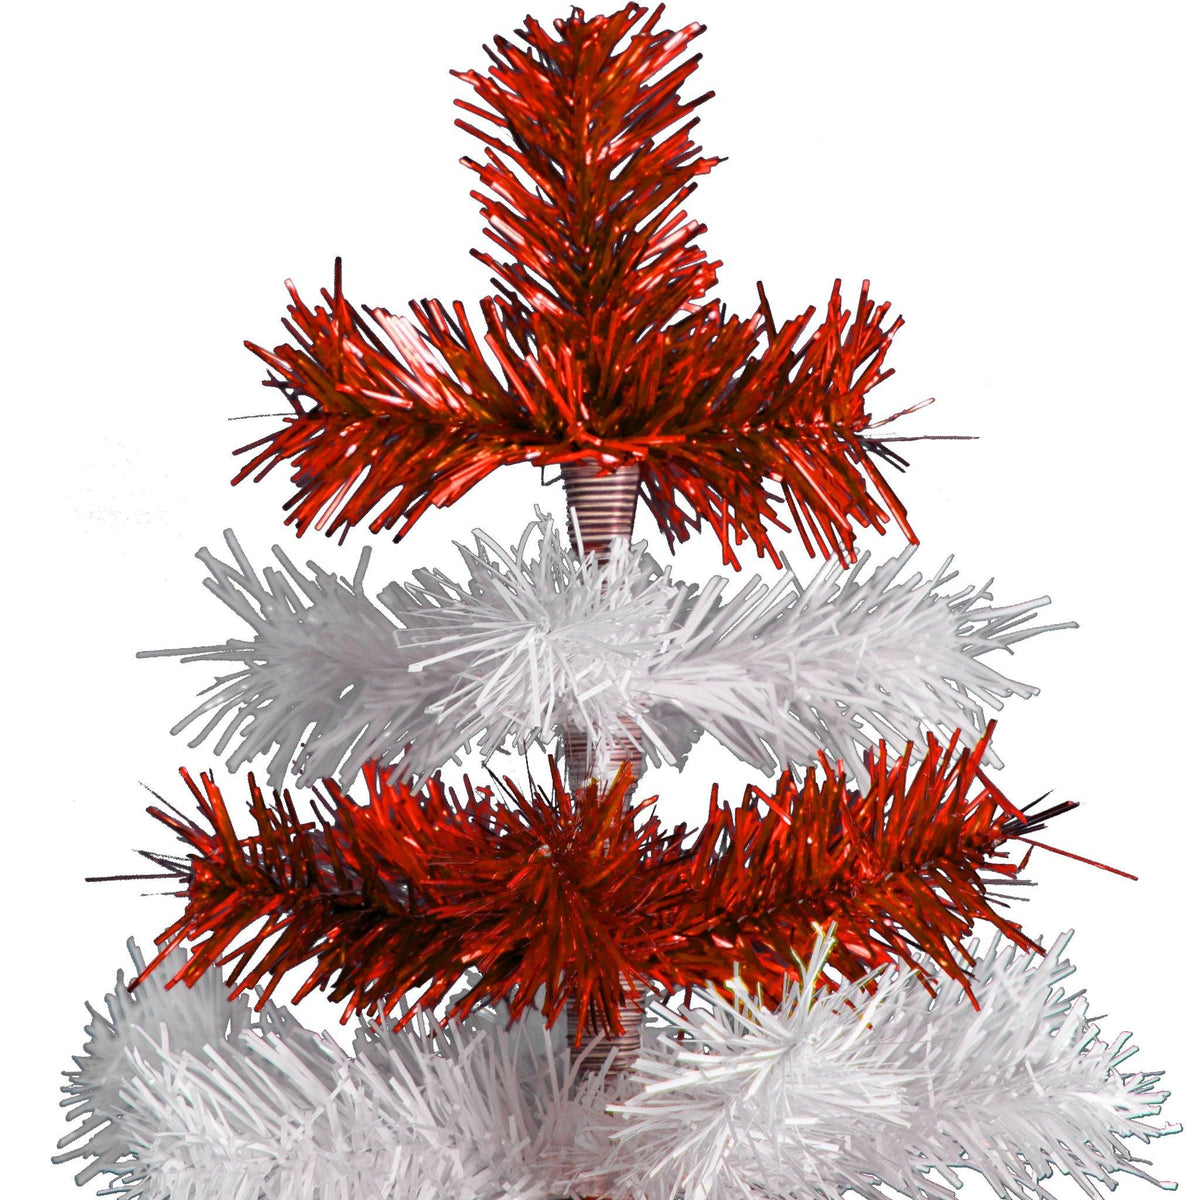 Red & White Layered Tinsel Christmas Trees!    Decorate for the holidays with a Shiny Red and Matte White retro-style Christmas Tree.  Incorporate a little white and blue into your holiday decorations this year.  Shop now at leedisplay.com